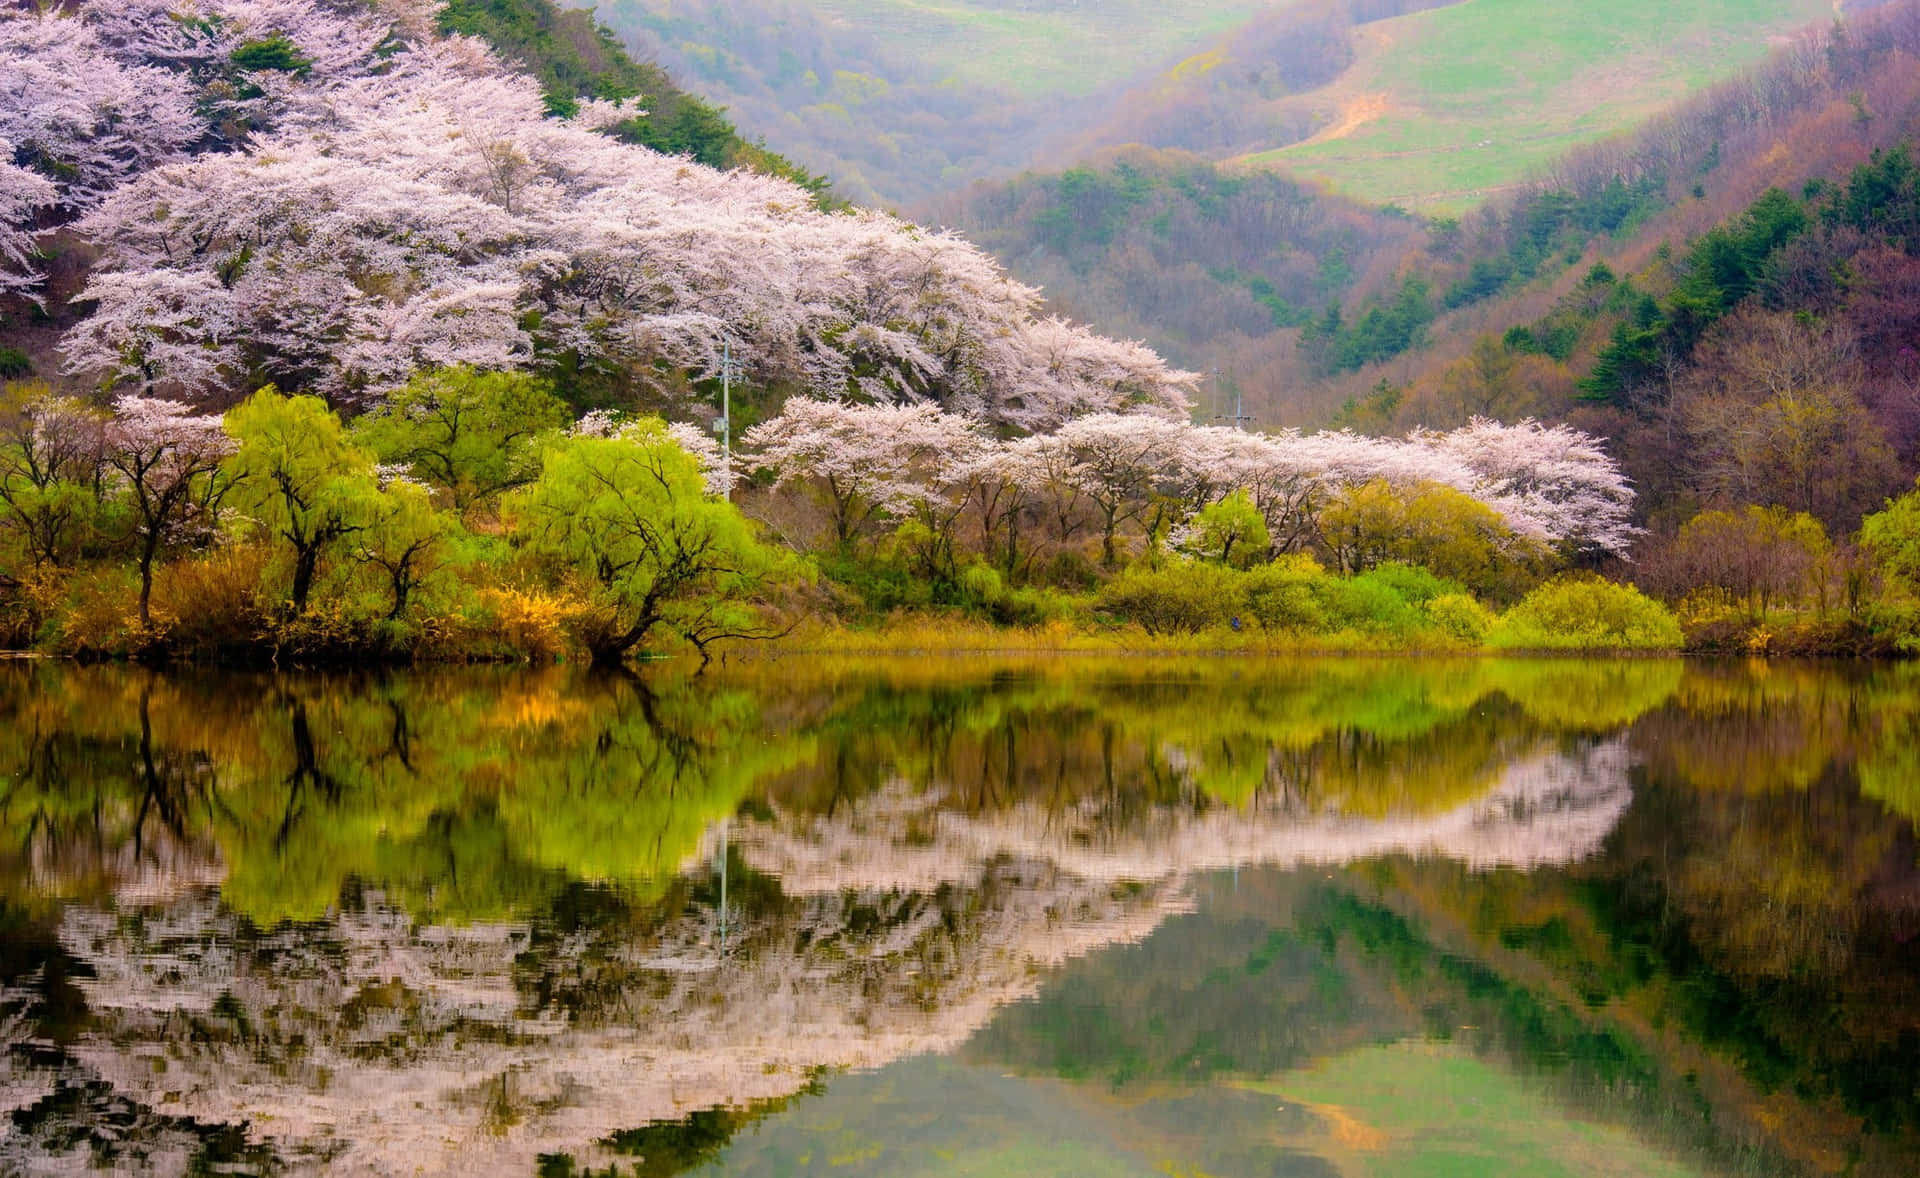 A Serene Spring Day at the Mountain Wallpaper